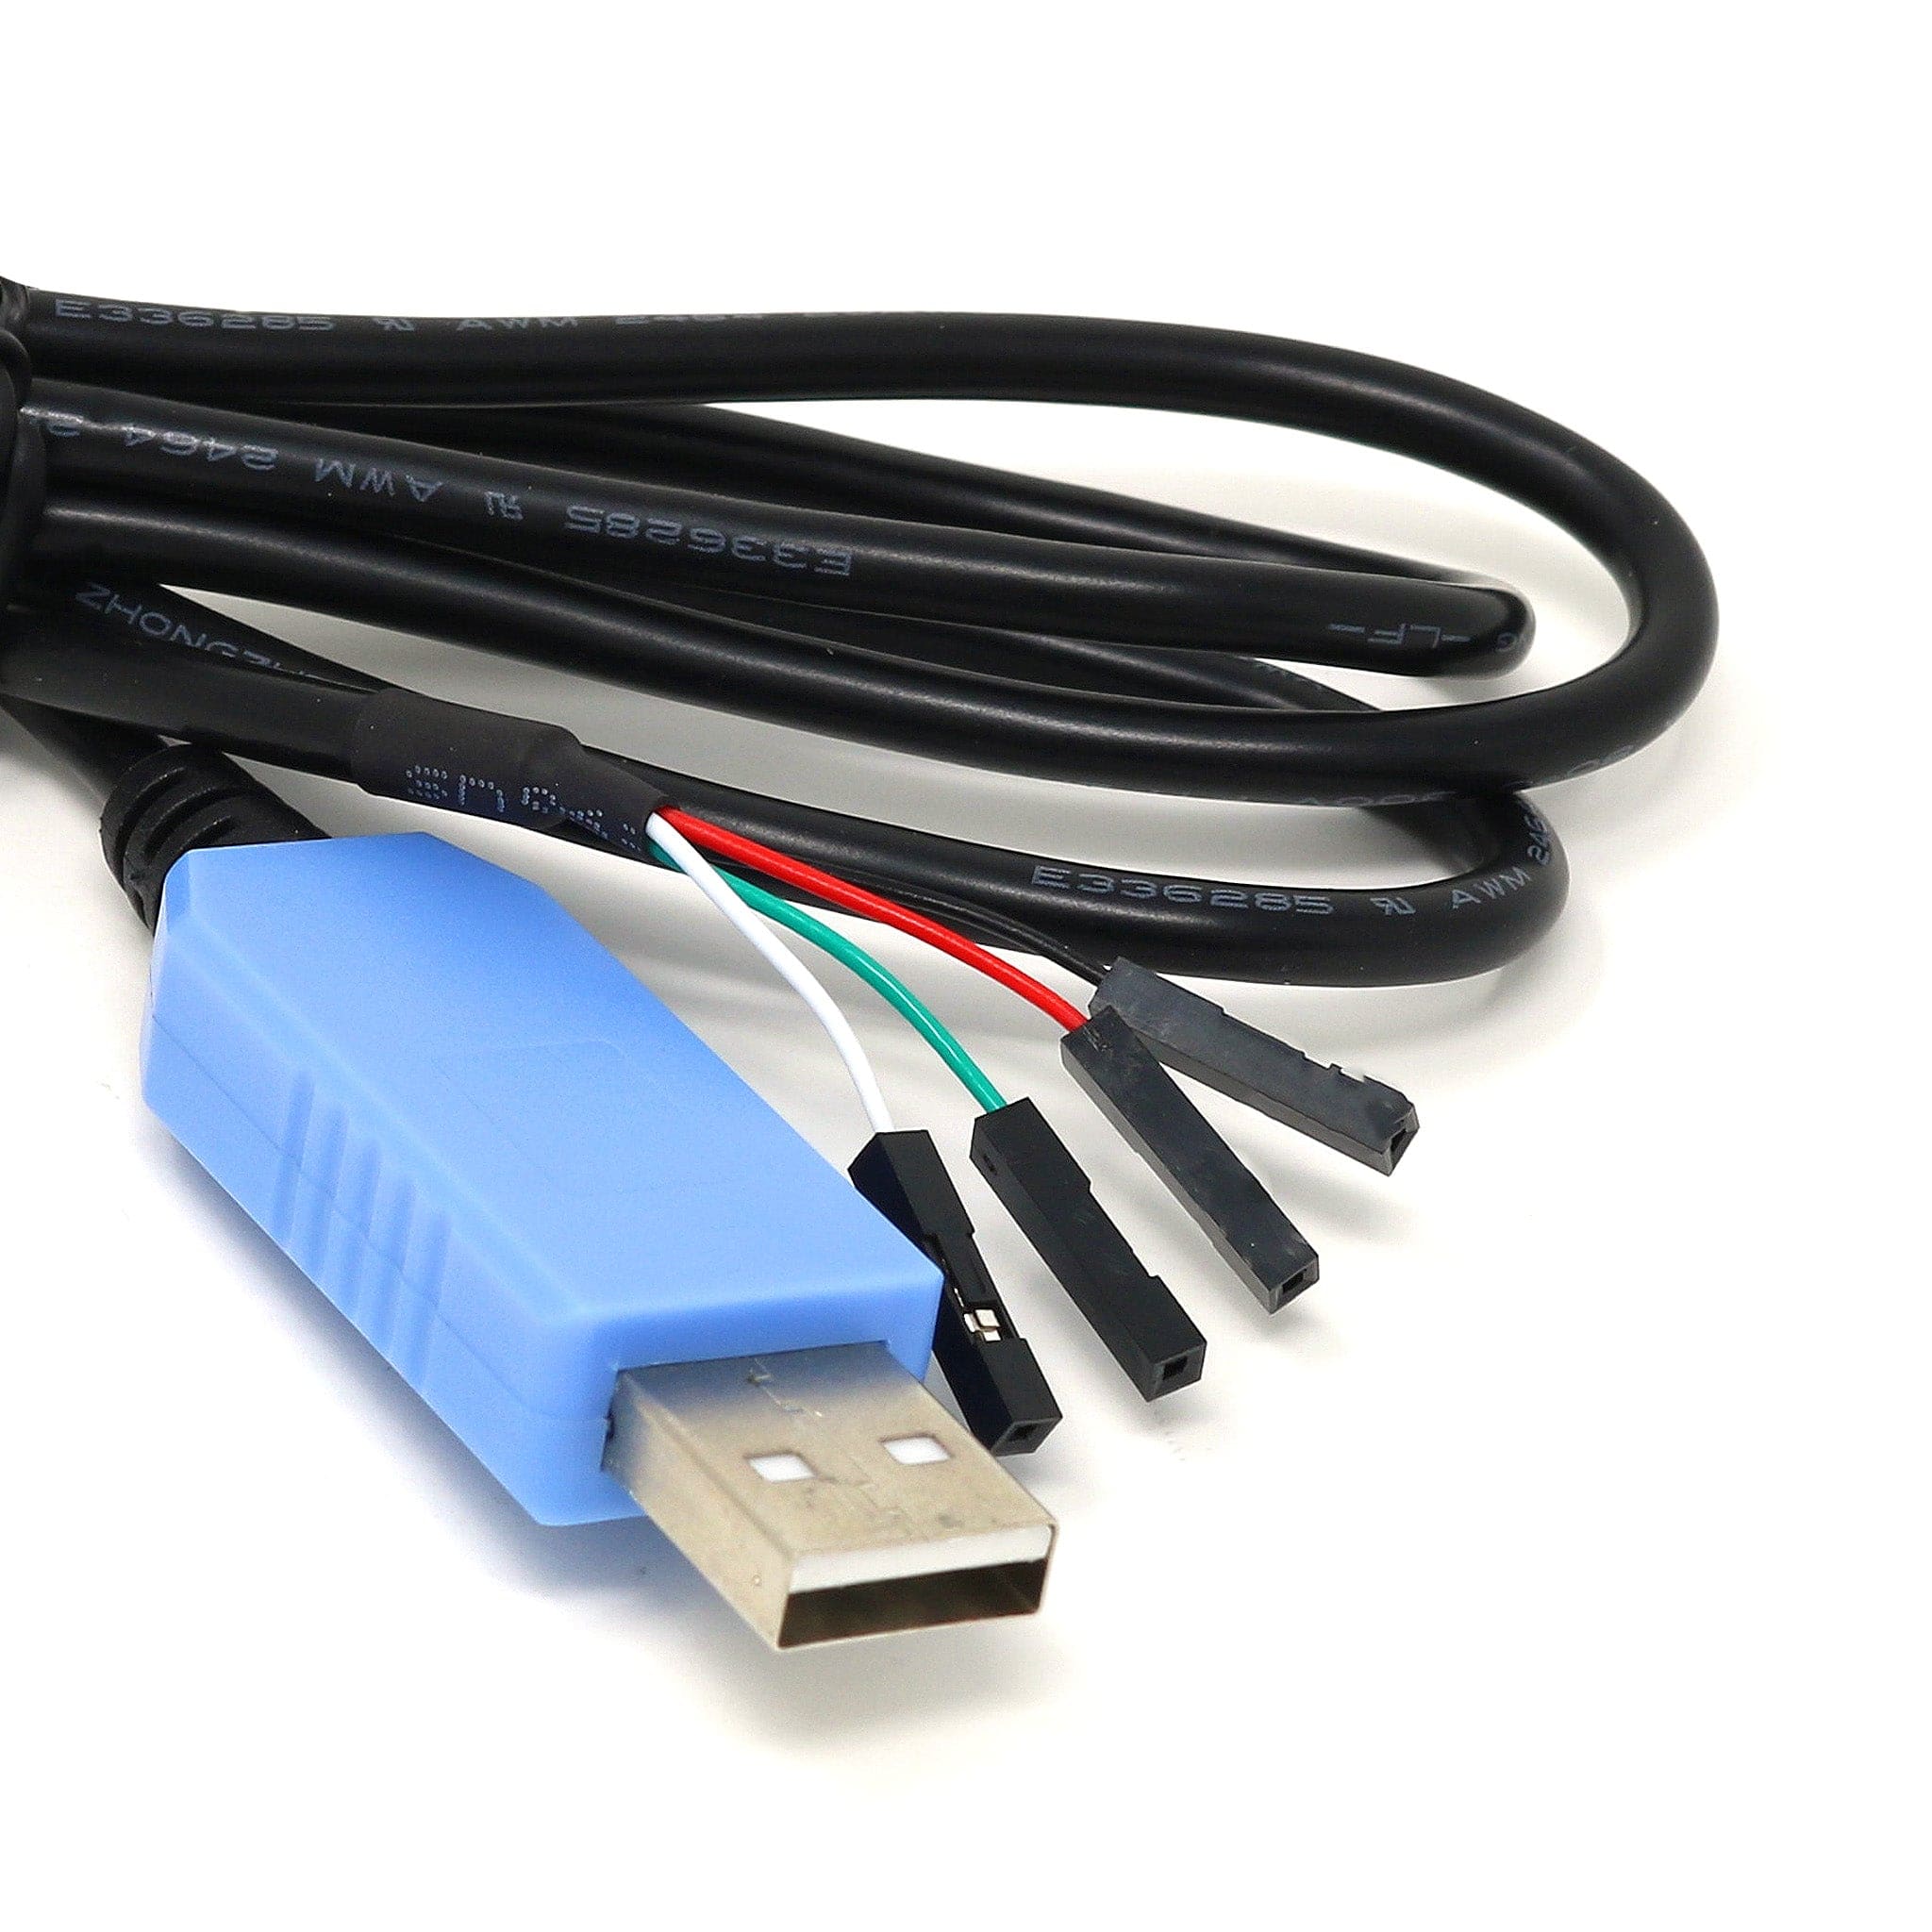 USB to TTL Serial Cable - Debug / Console Cable for Raspberry Pi - The Pi Hut